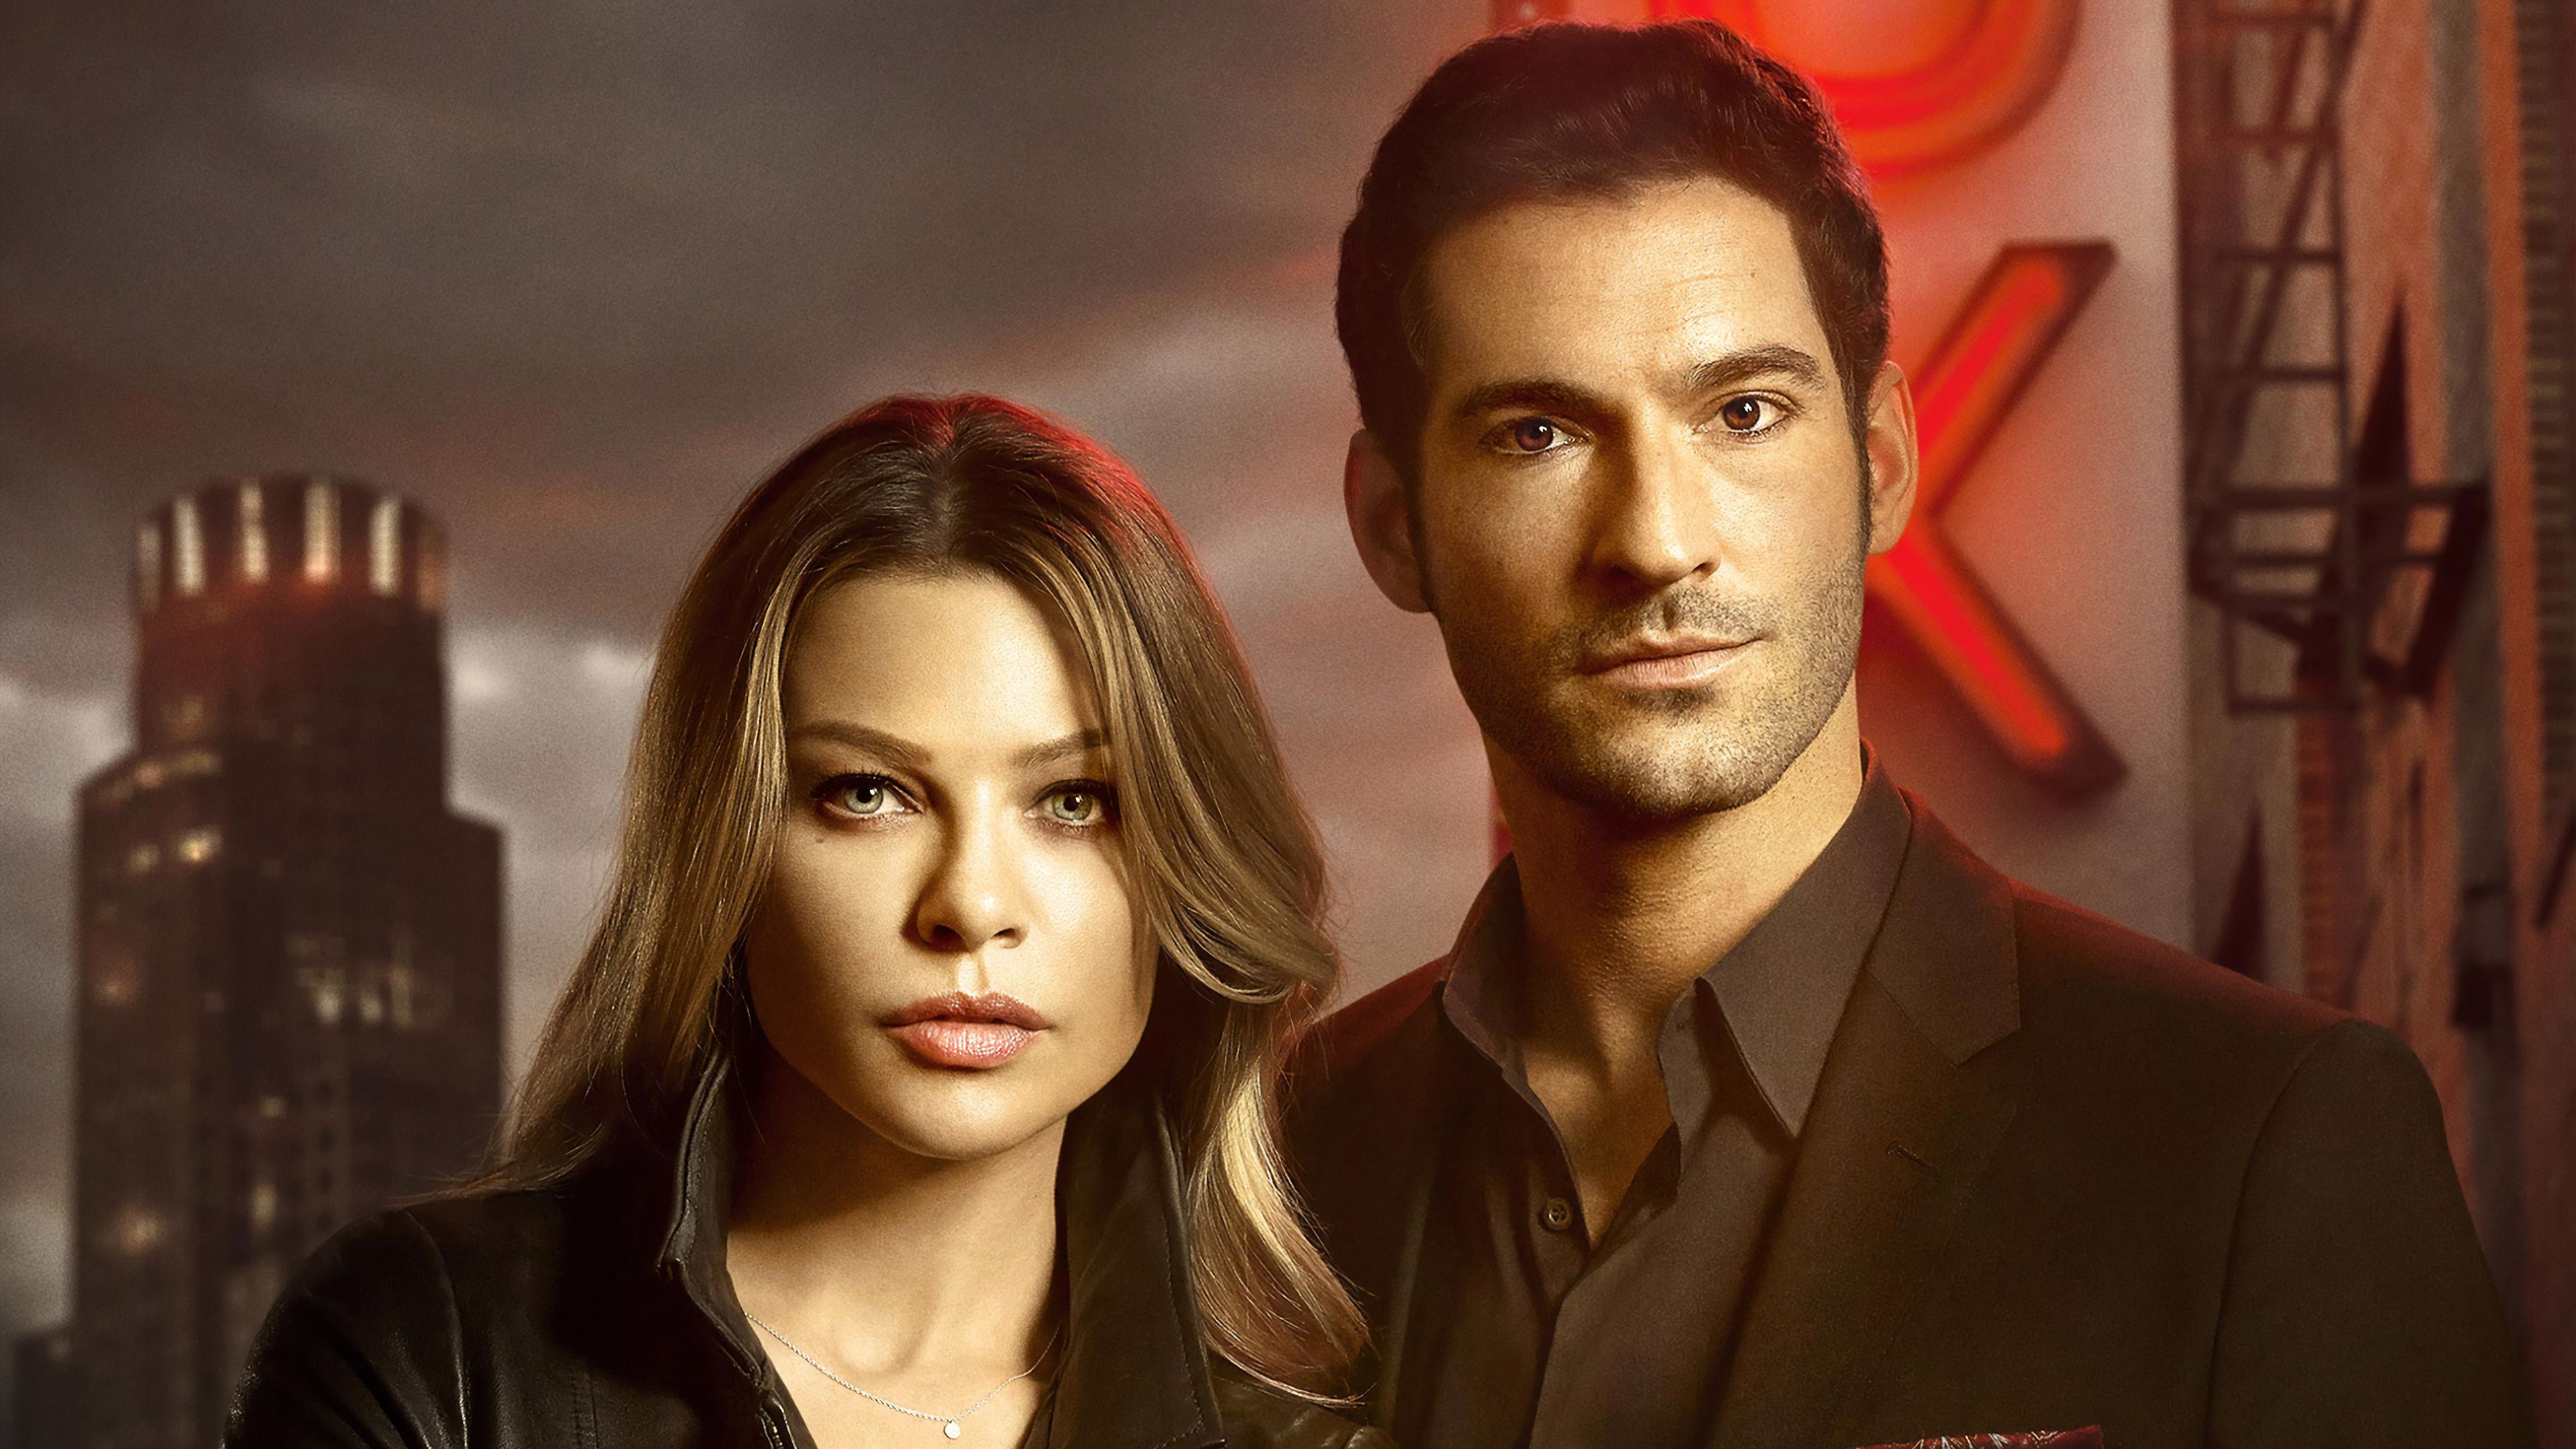 Lucifer Season 4 2019 4k, HD Tv Shows, 4k Wallpaper, Image, Background, Photo and Picture